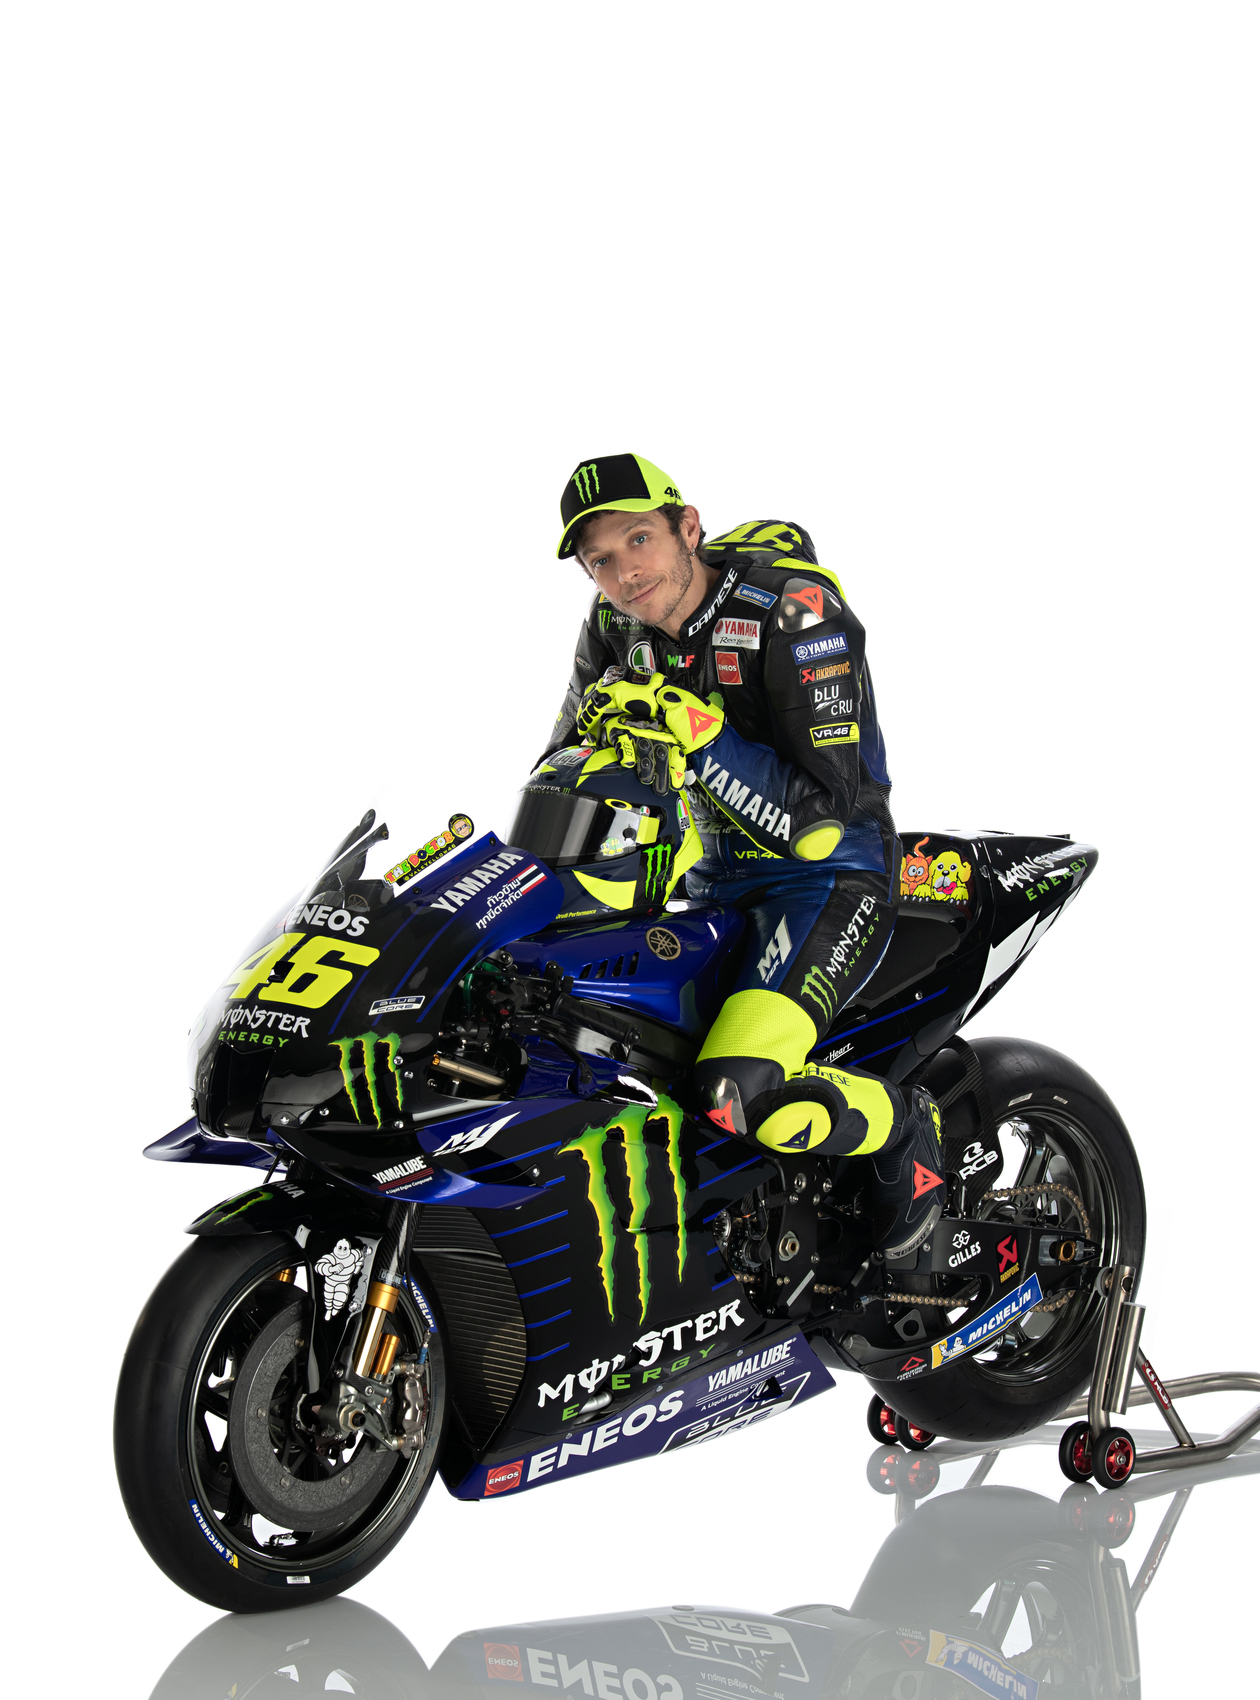 Yamaha is testing a holeshot device. Will it make Valentino Rossi's M1 fast enough? 10